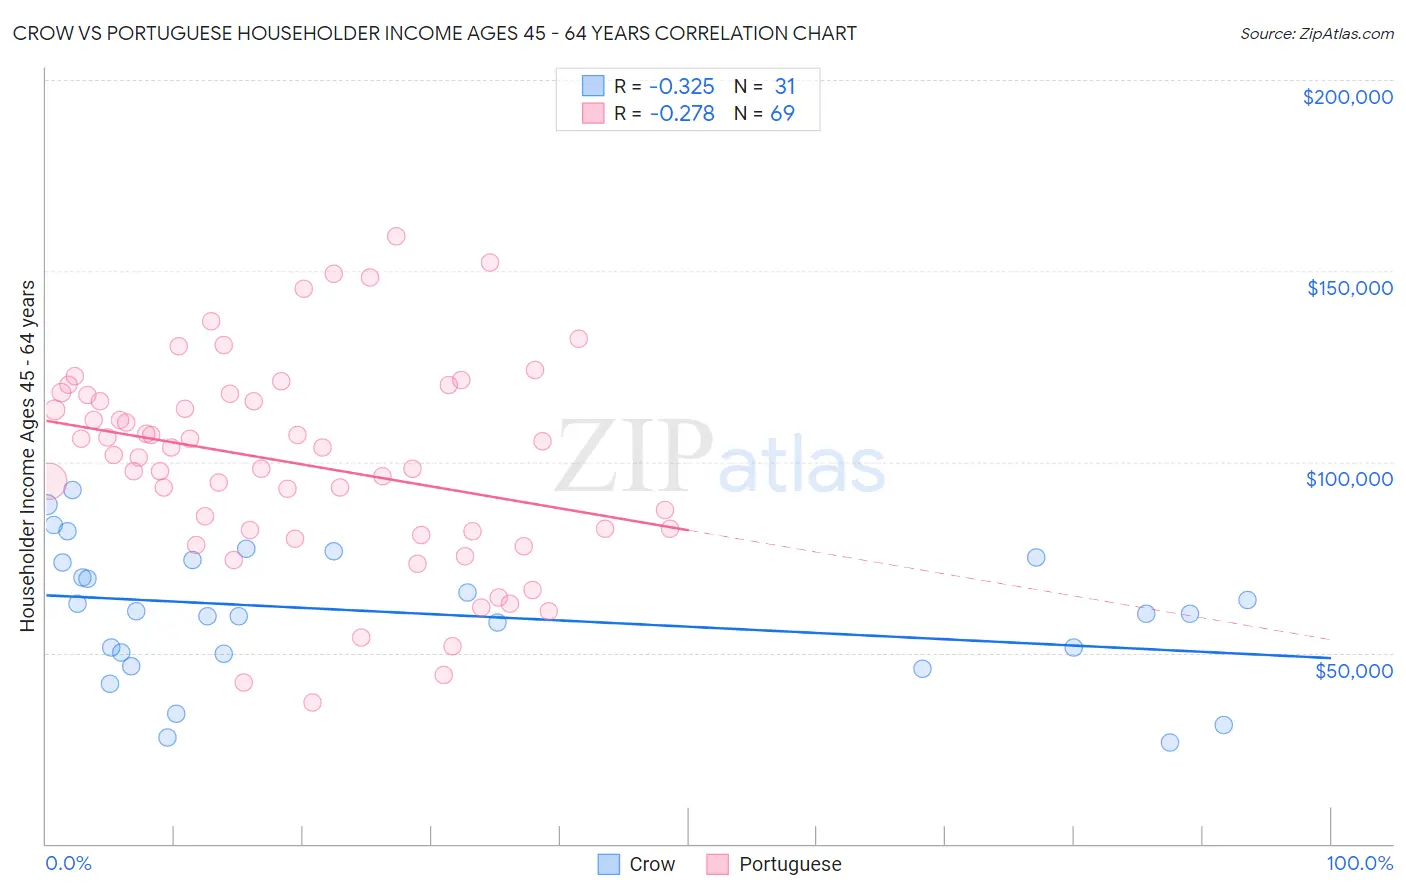 Crow vs Portuguese Householder Income Ages 45 - 64 years